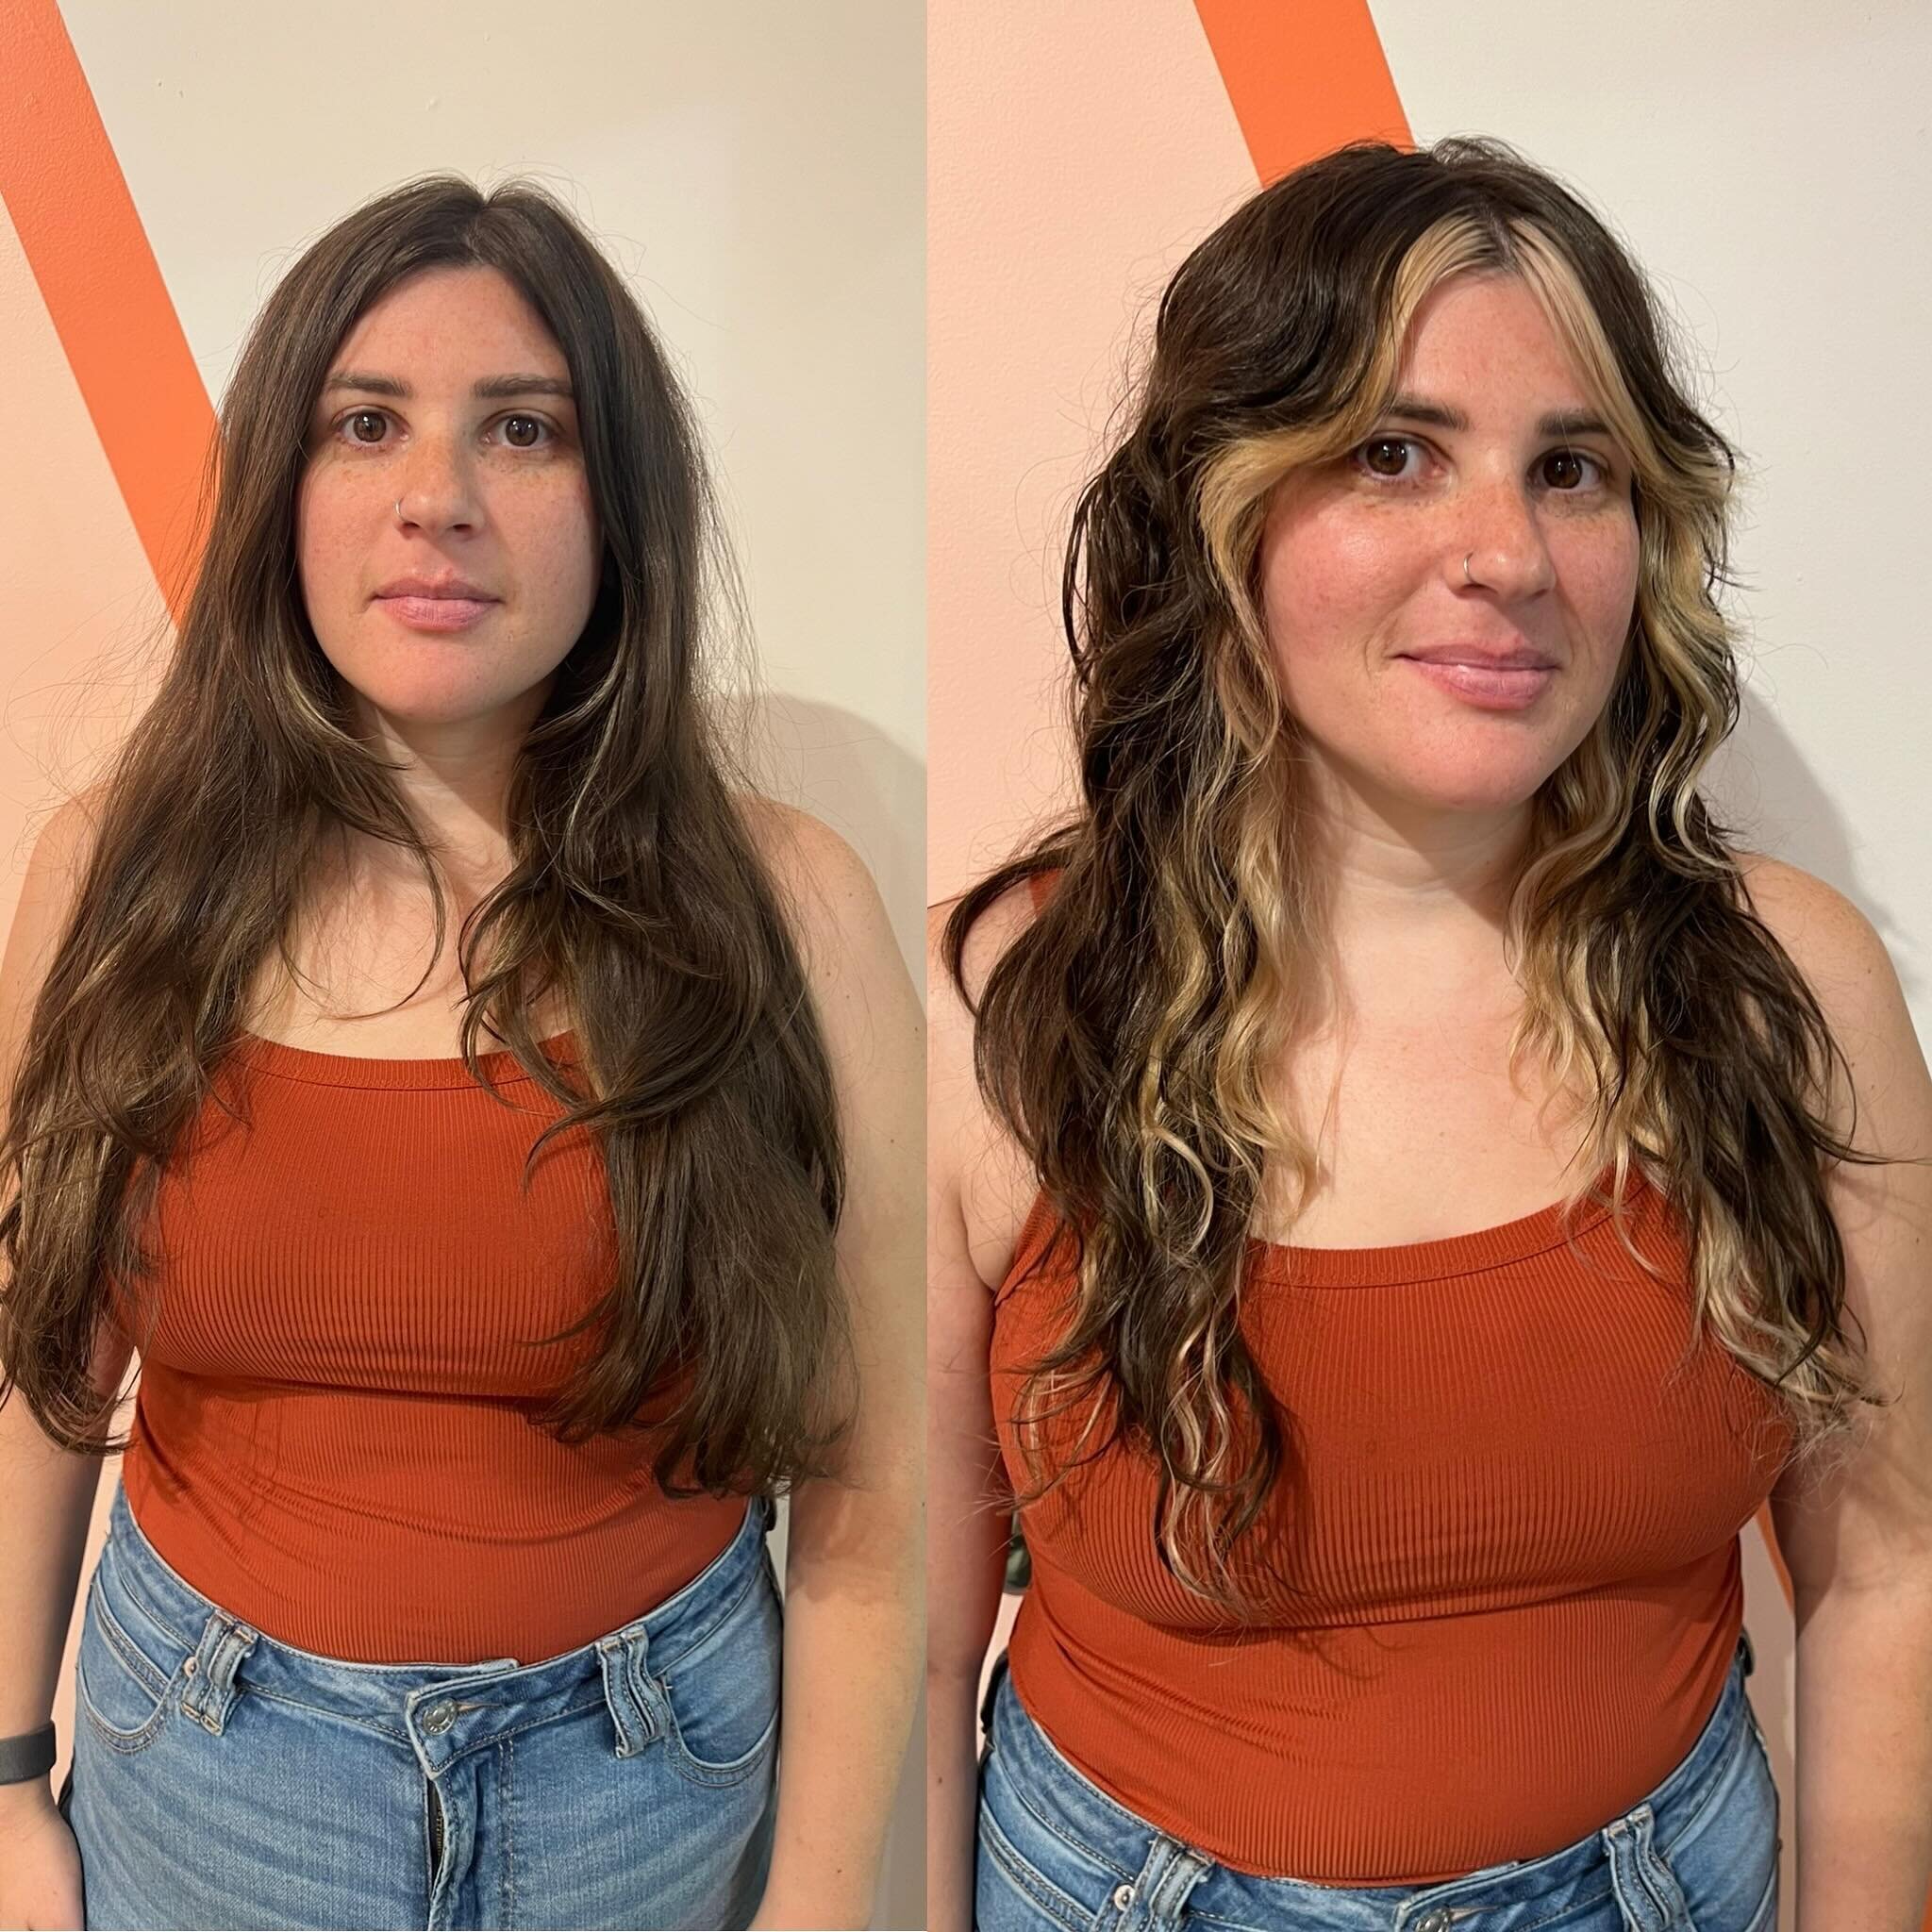 BEFORE : AFTER Cut and color for Molly 🥰
.
.
.
.
.
.
#beforeandafter #curlyhair #shag #curlyshag #moneypiece